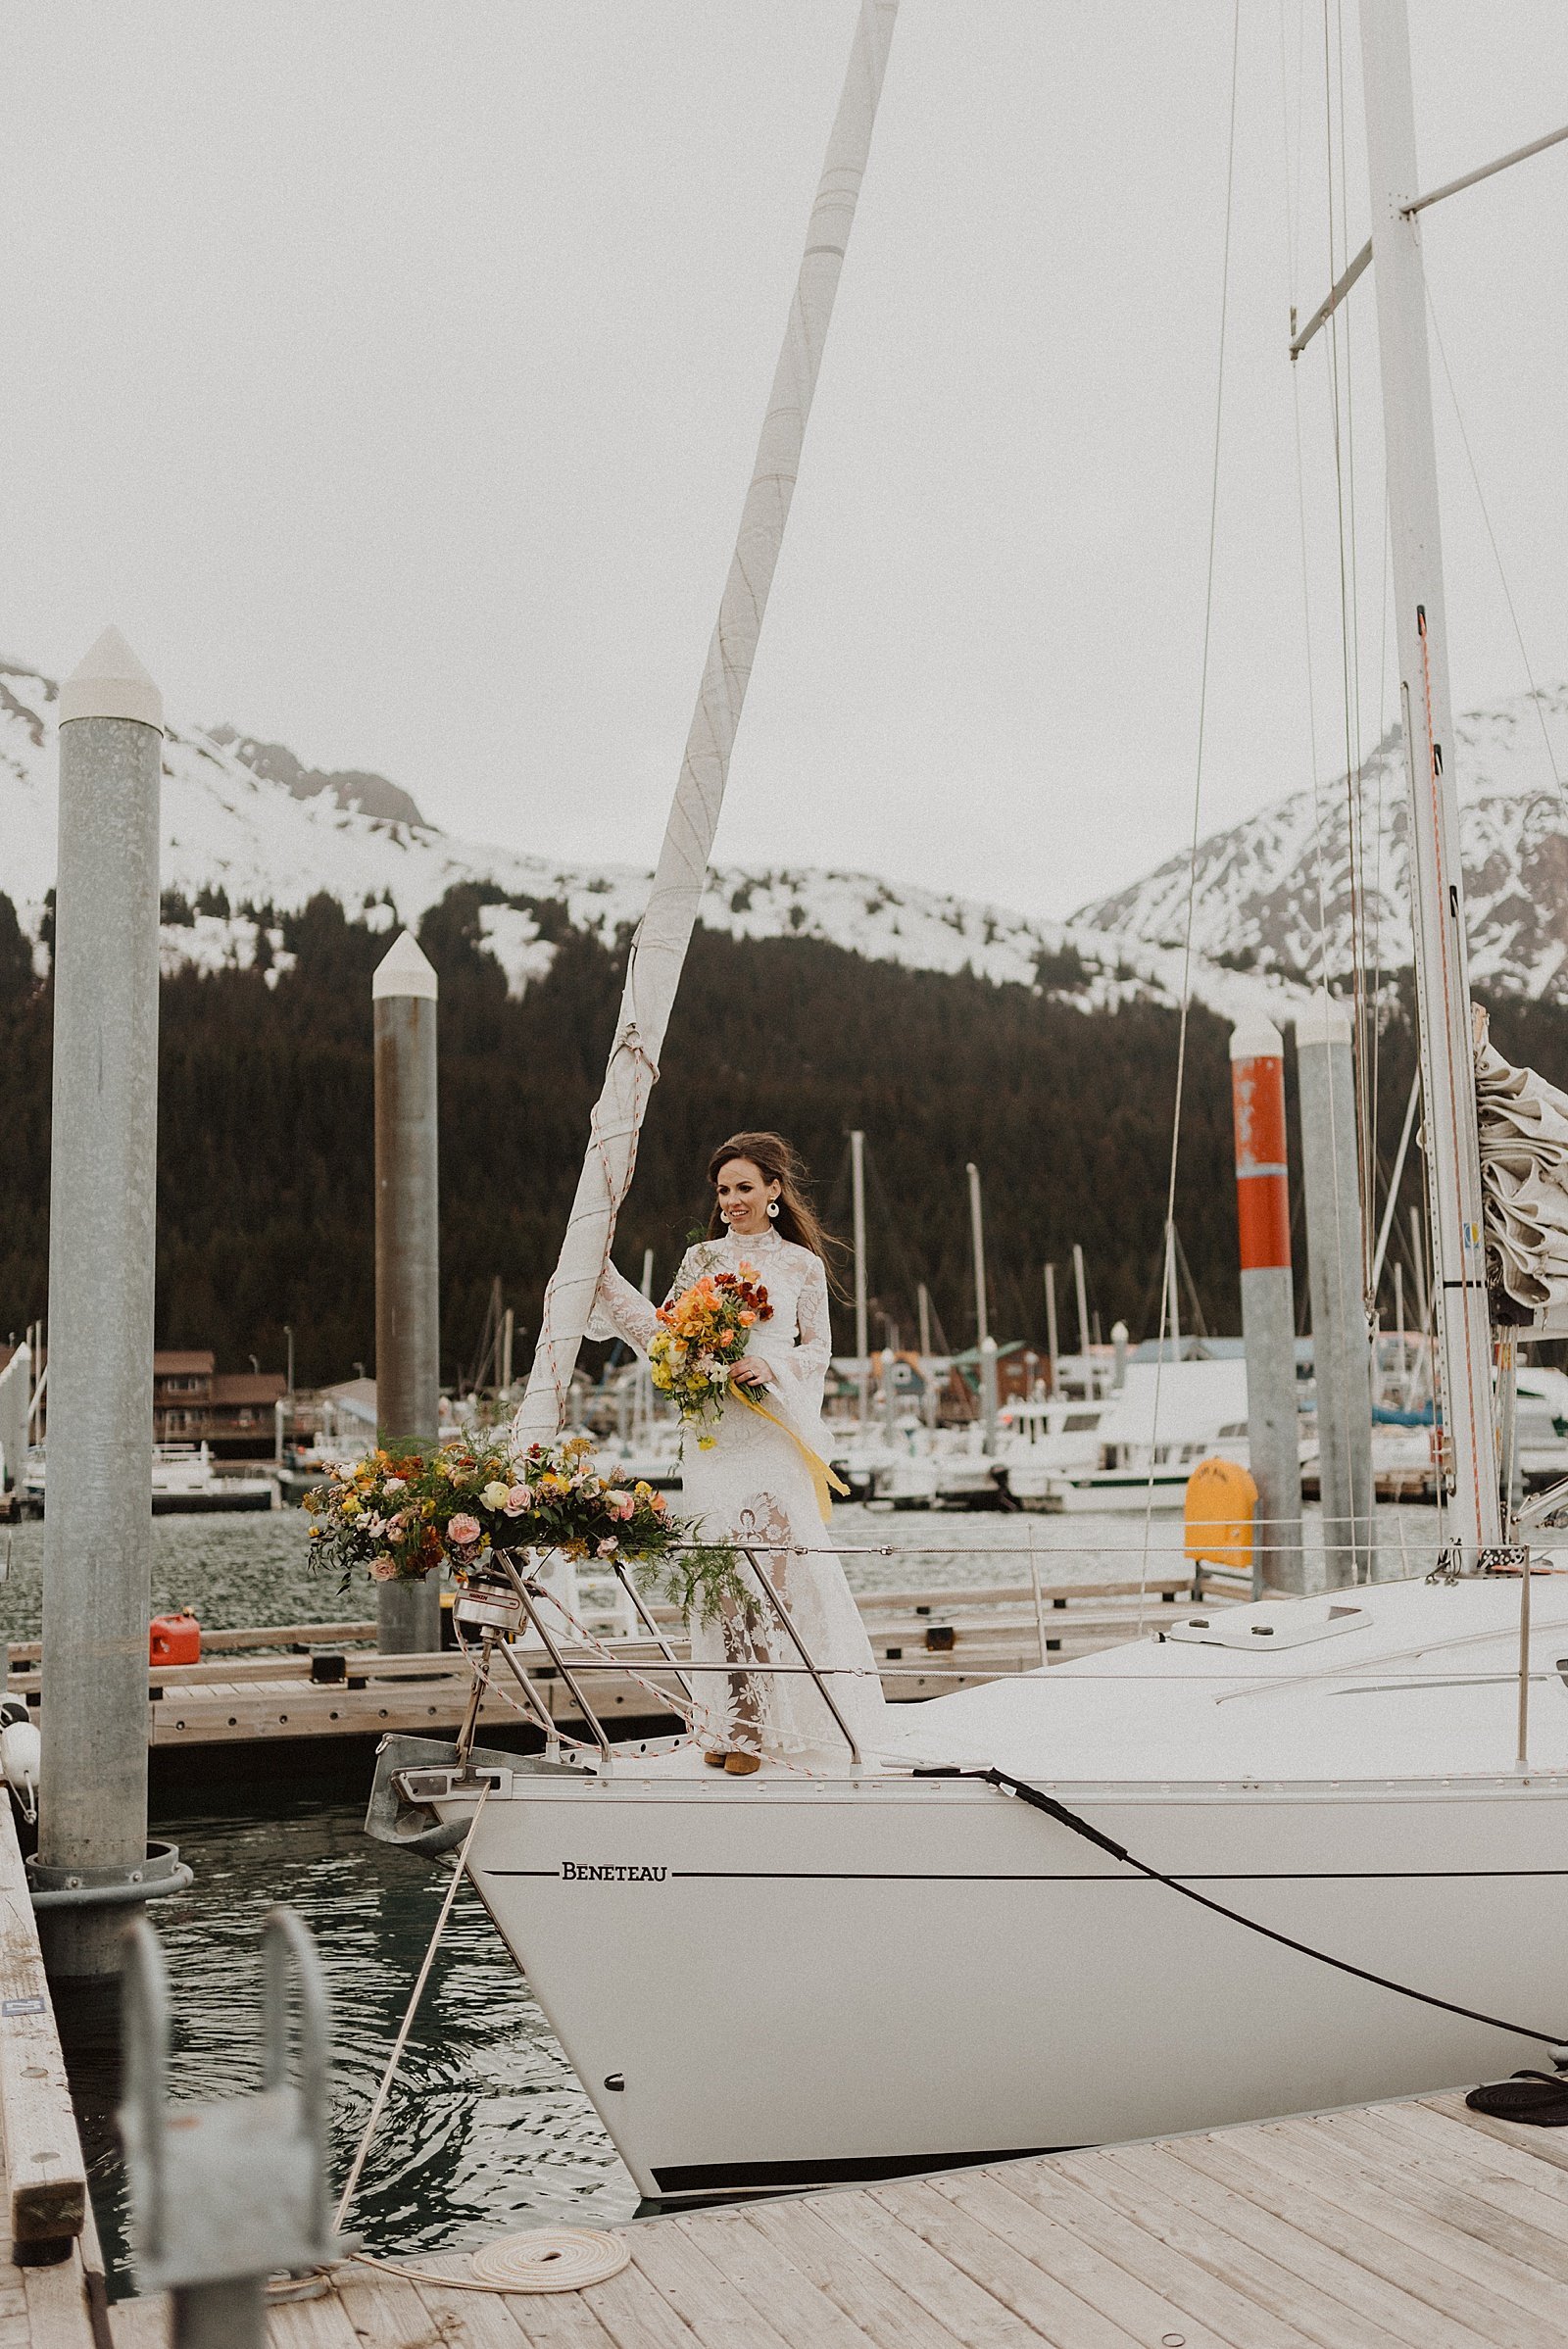  Bride standing on a boat for a Retro Seward Styled Shoot 